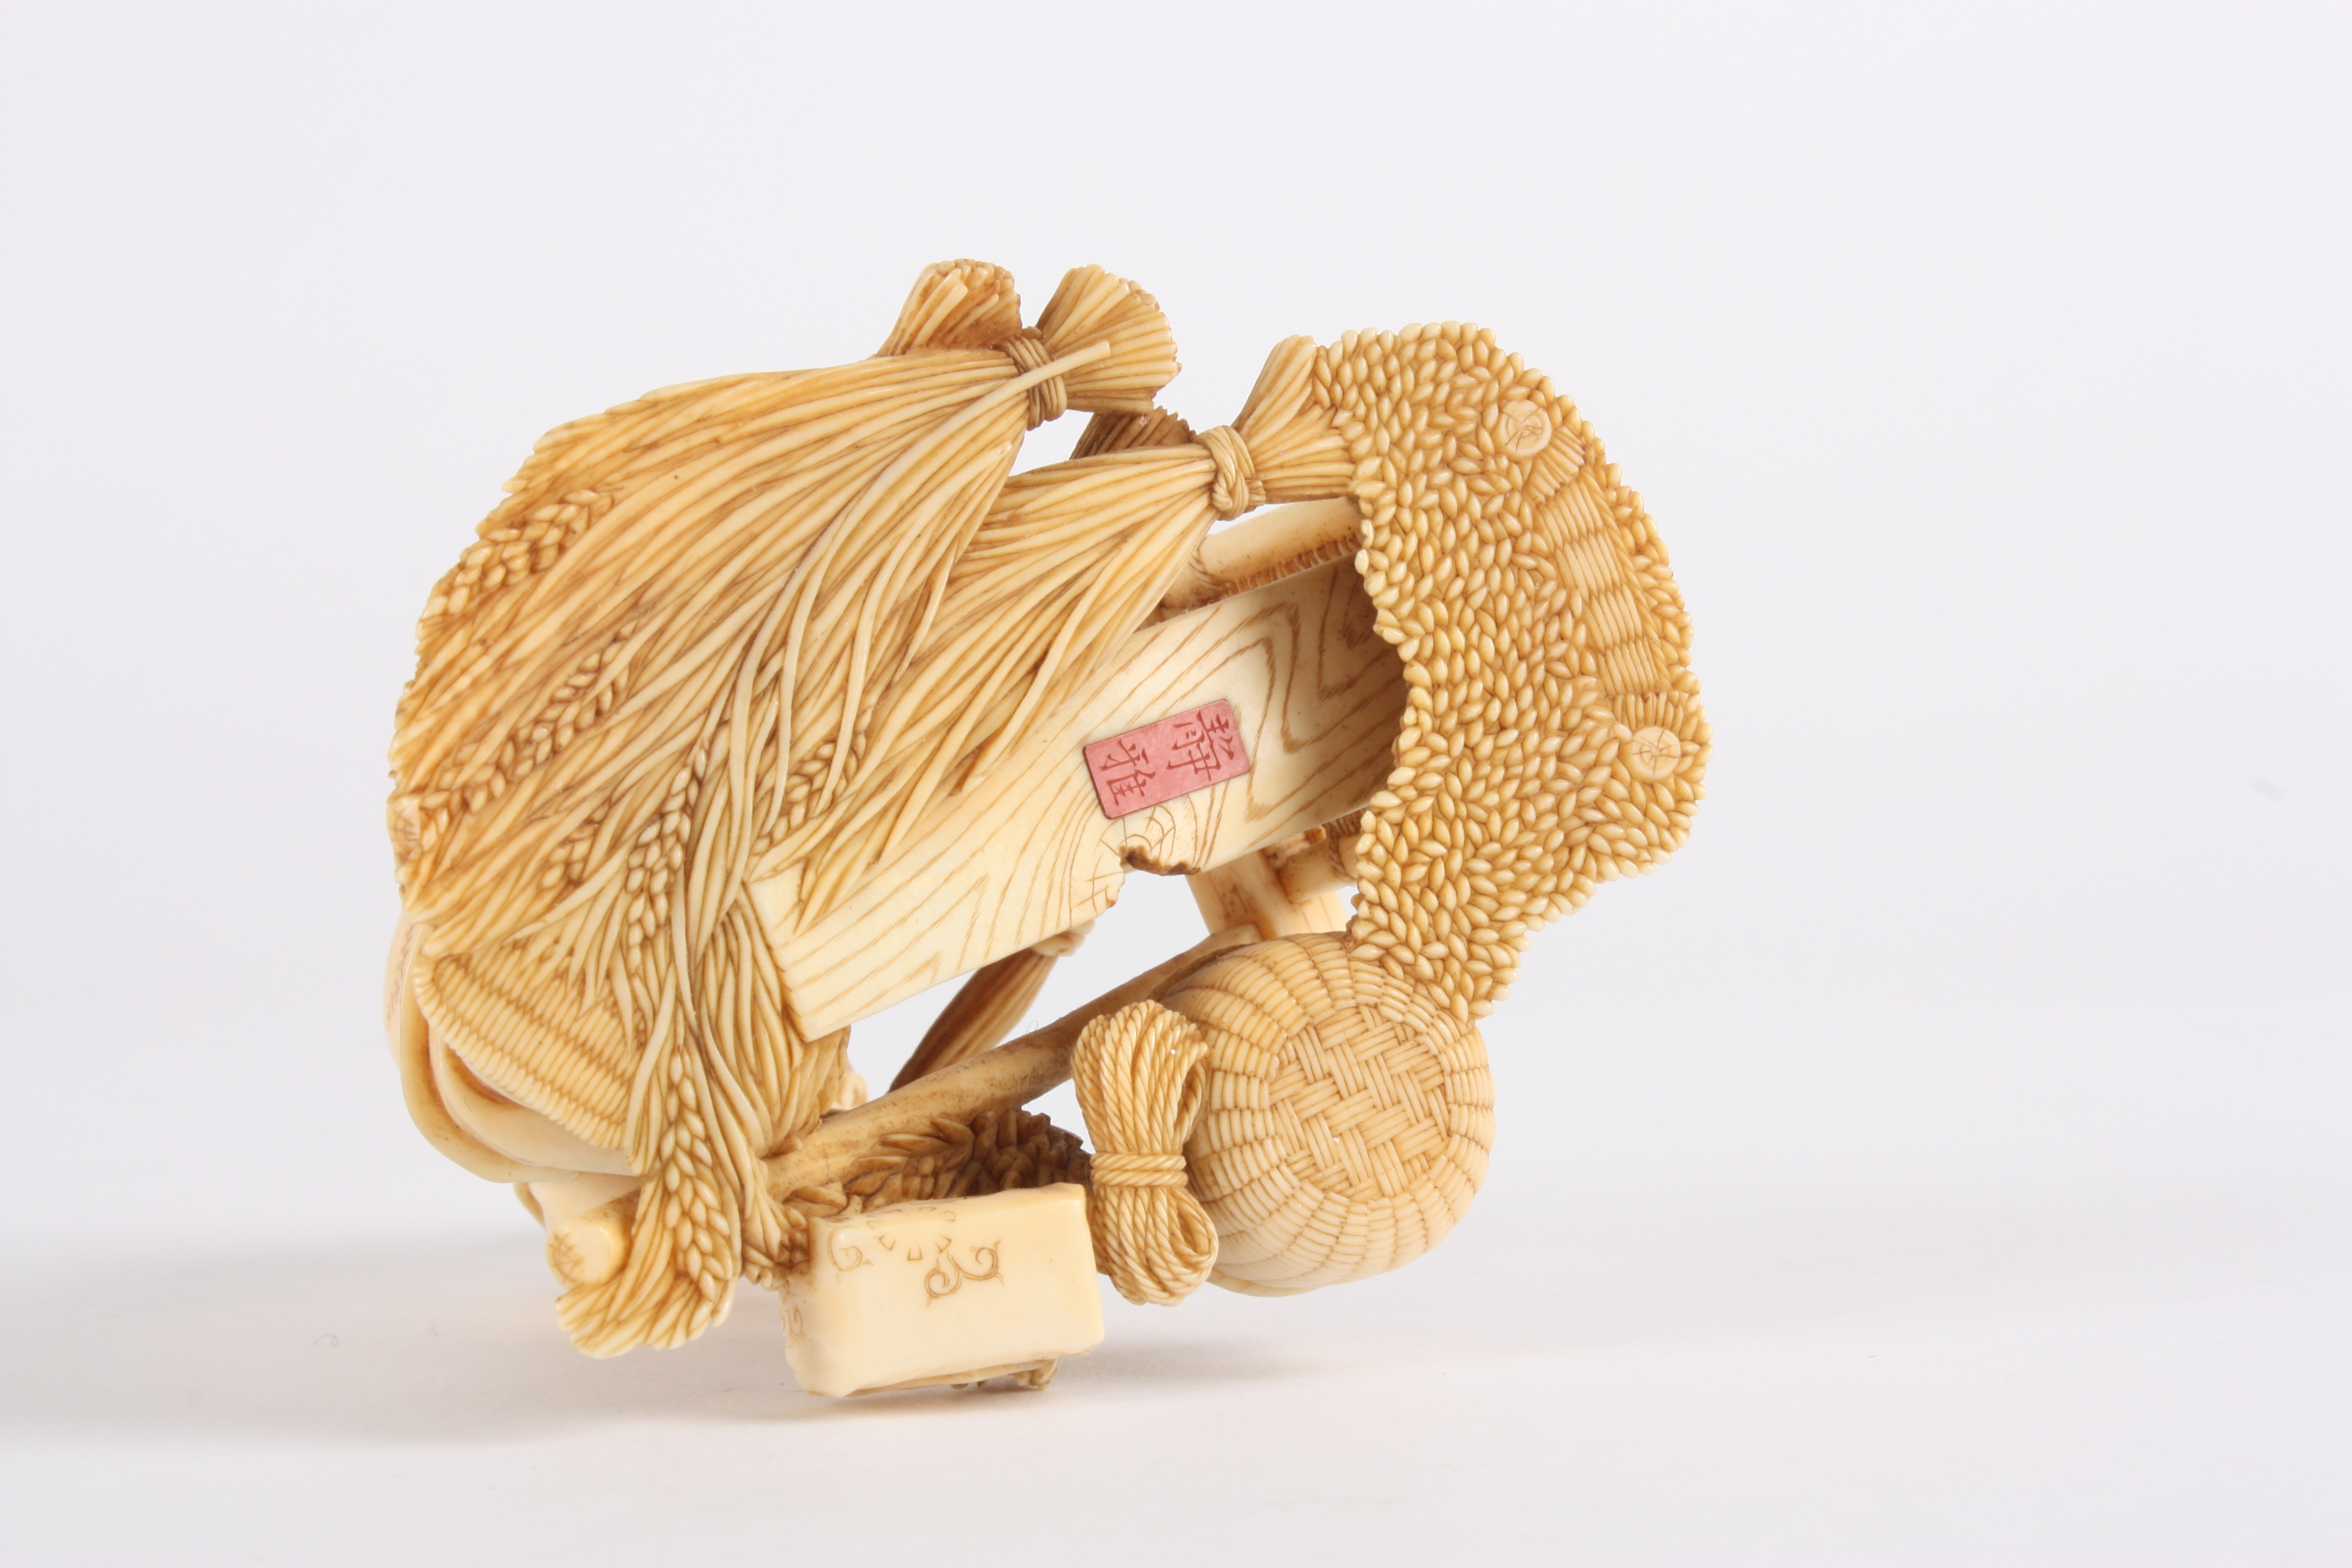 A Japanese finely carved ivory figure of a man
stood threshing corn using a foot operated machine, - Image 5 of 5